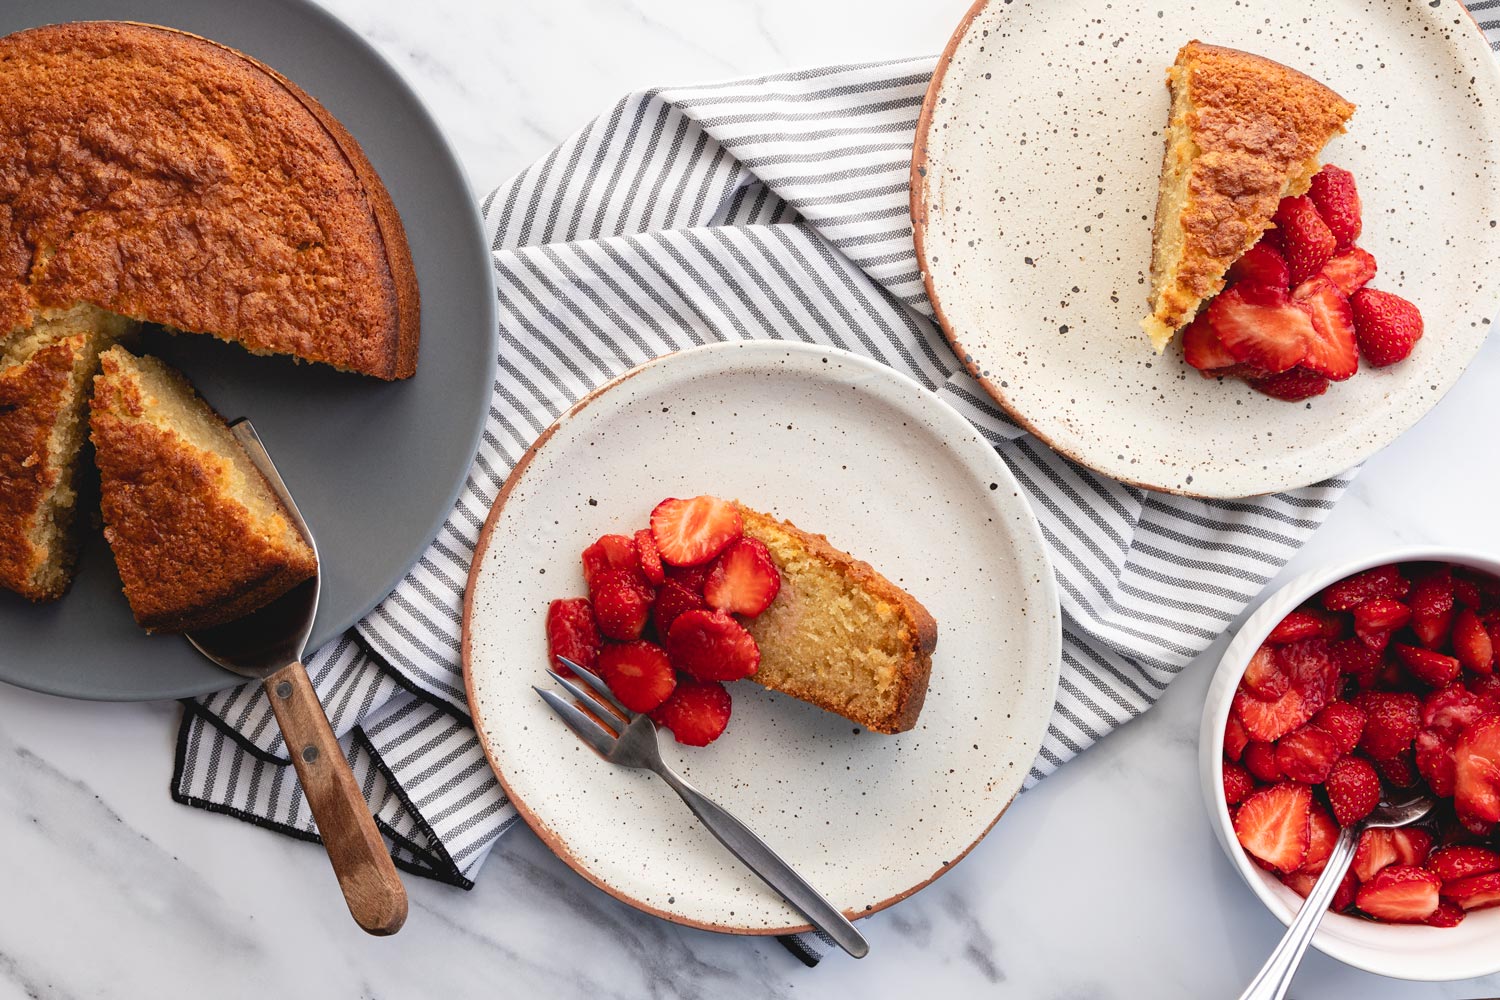 olive oil cake with balsamic macerated strawberries